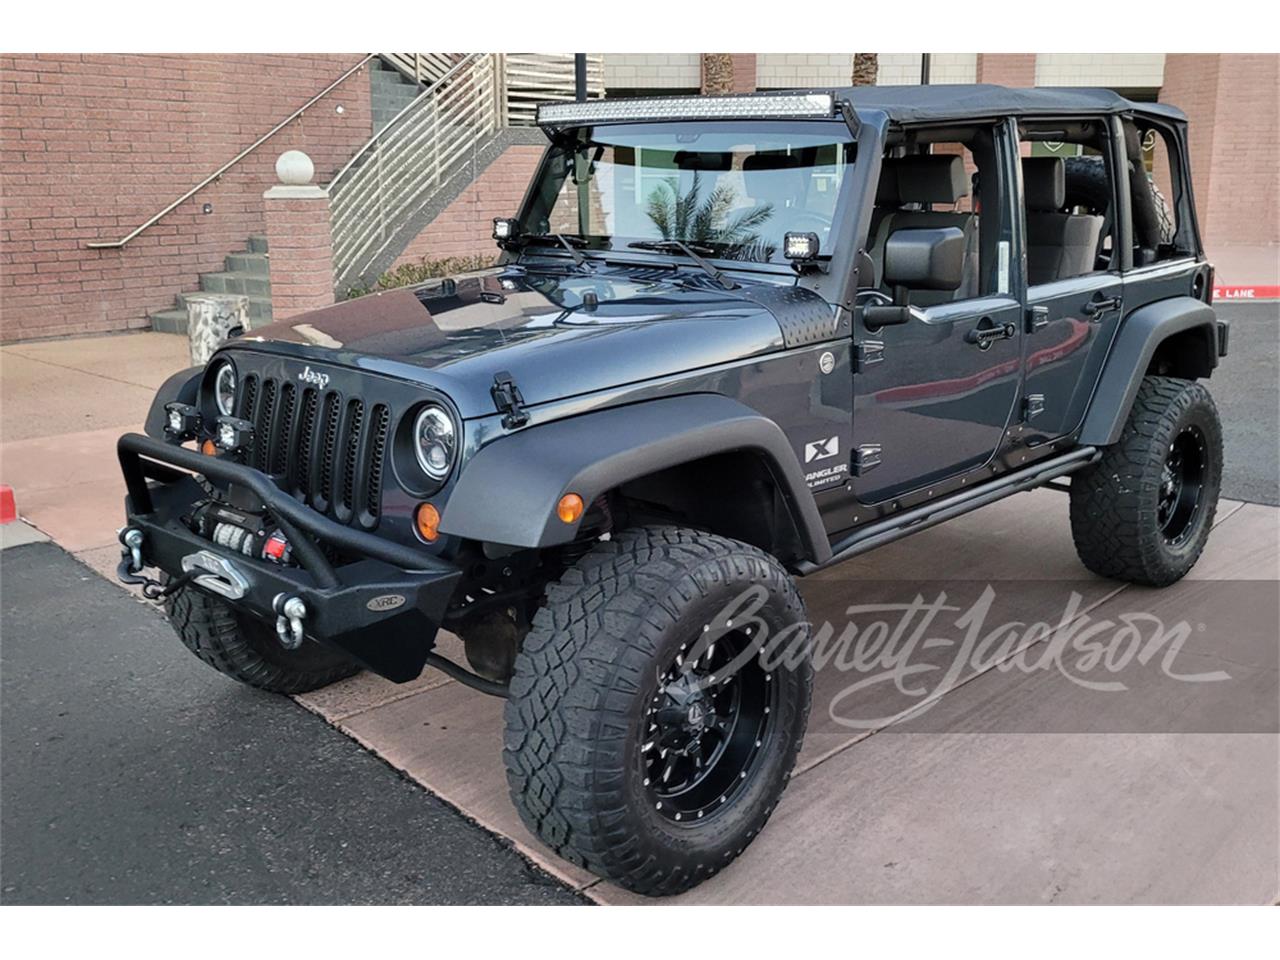 For Sale at Auction: 2007 Jeep Wrangler in Scottsdale, Arizona for sale in Scottsdale, AZ